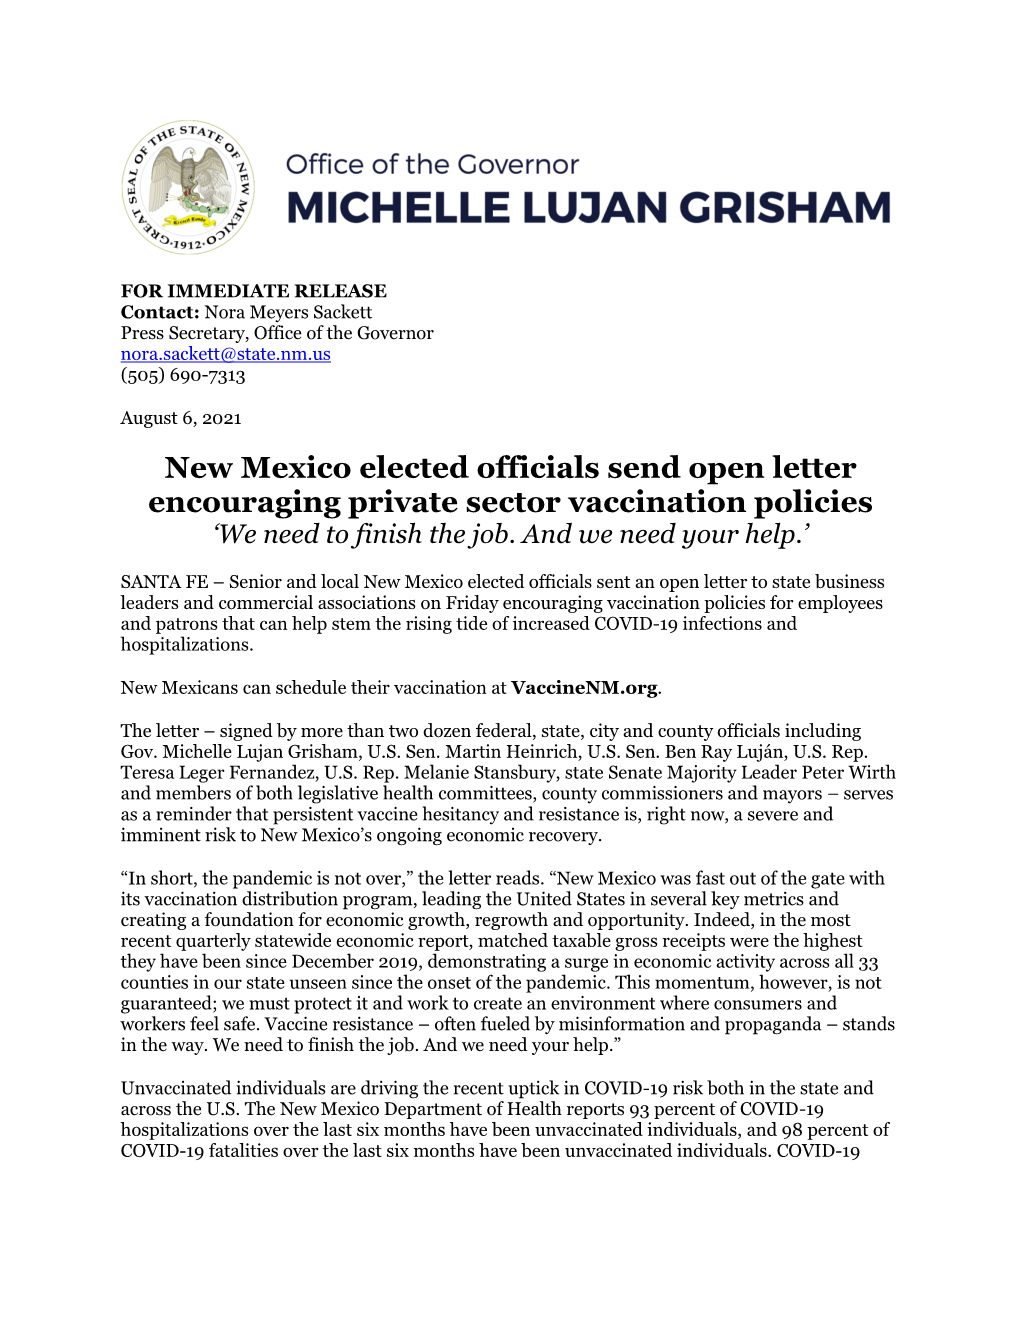 New Mexico Elected Officials Send Open Letter Encouraging Private Sector Vaccination Policies ‘We Need to Finish the Job